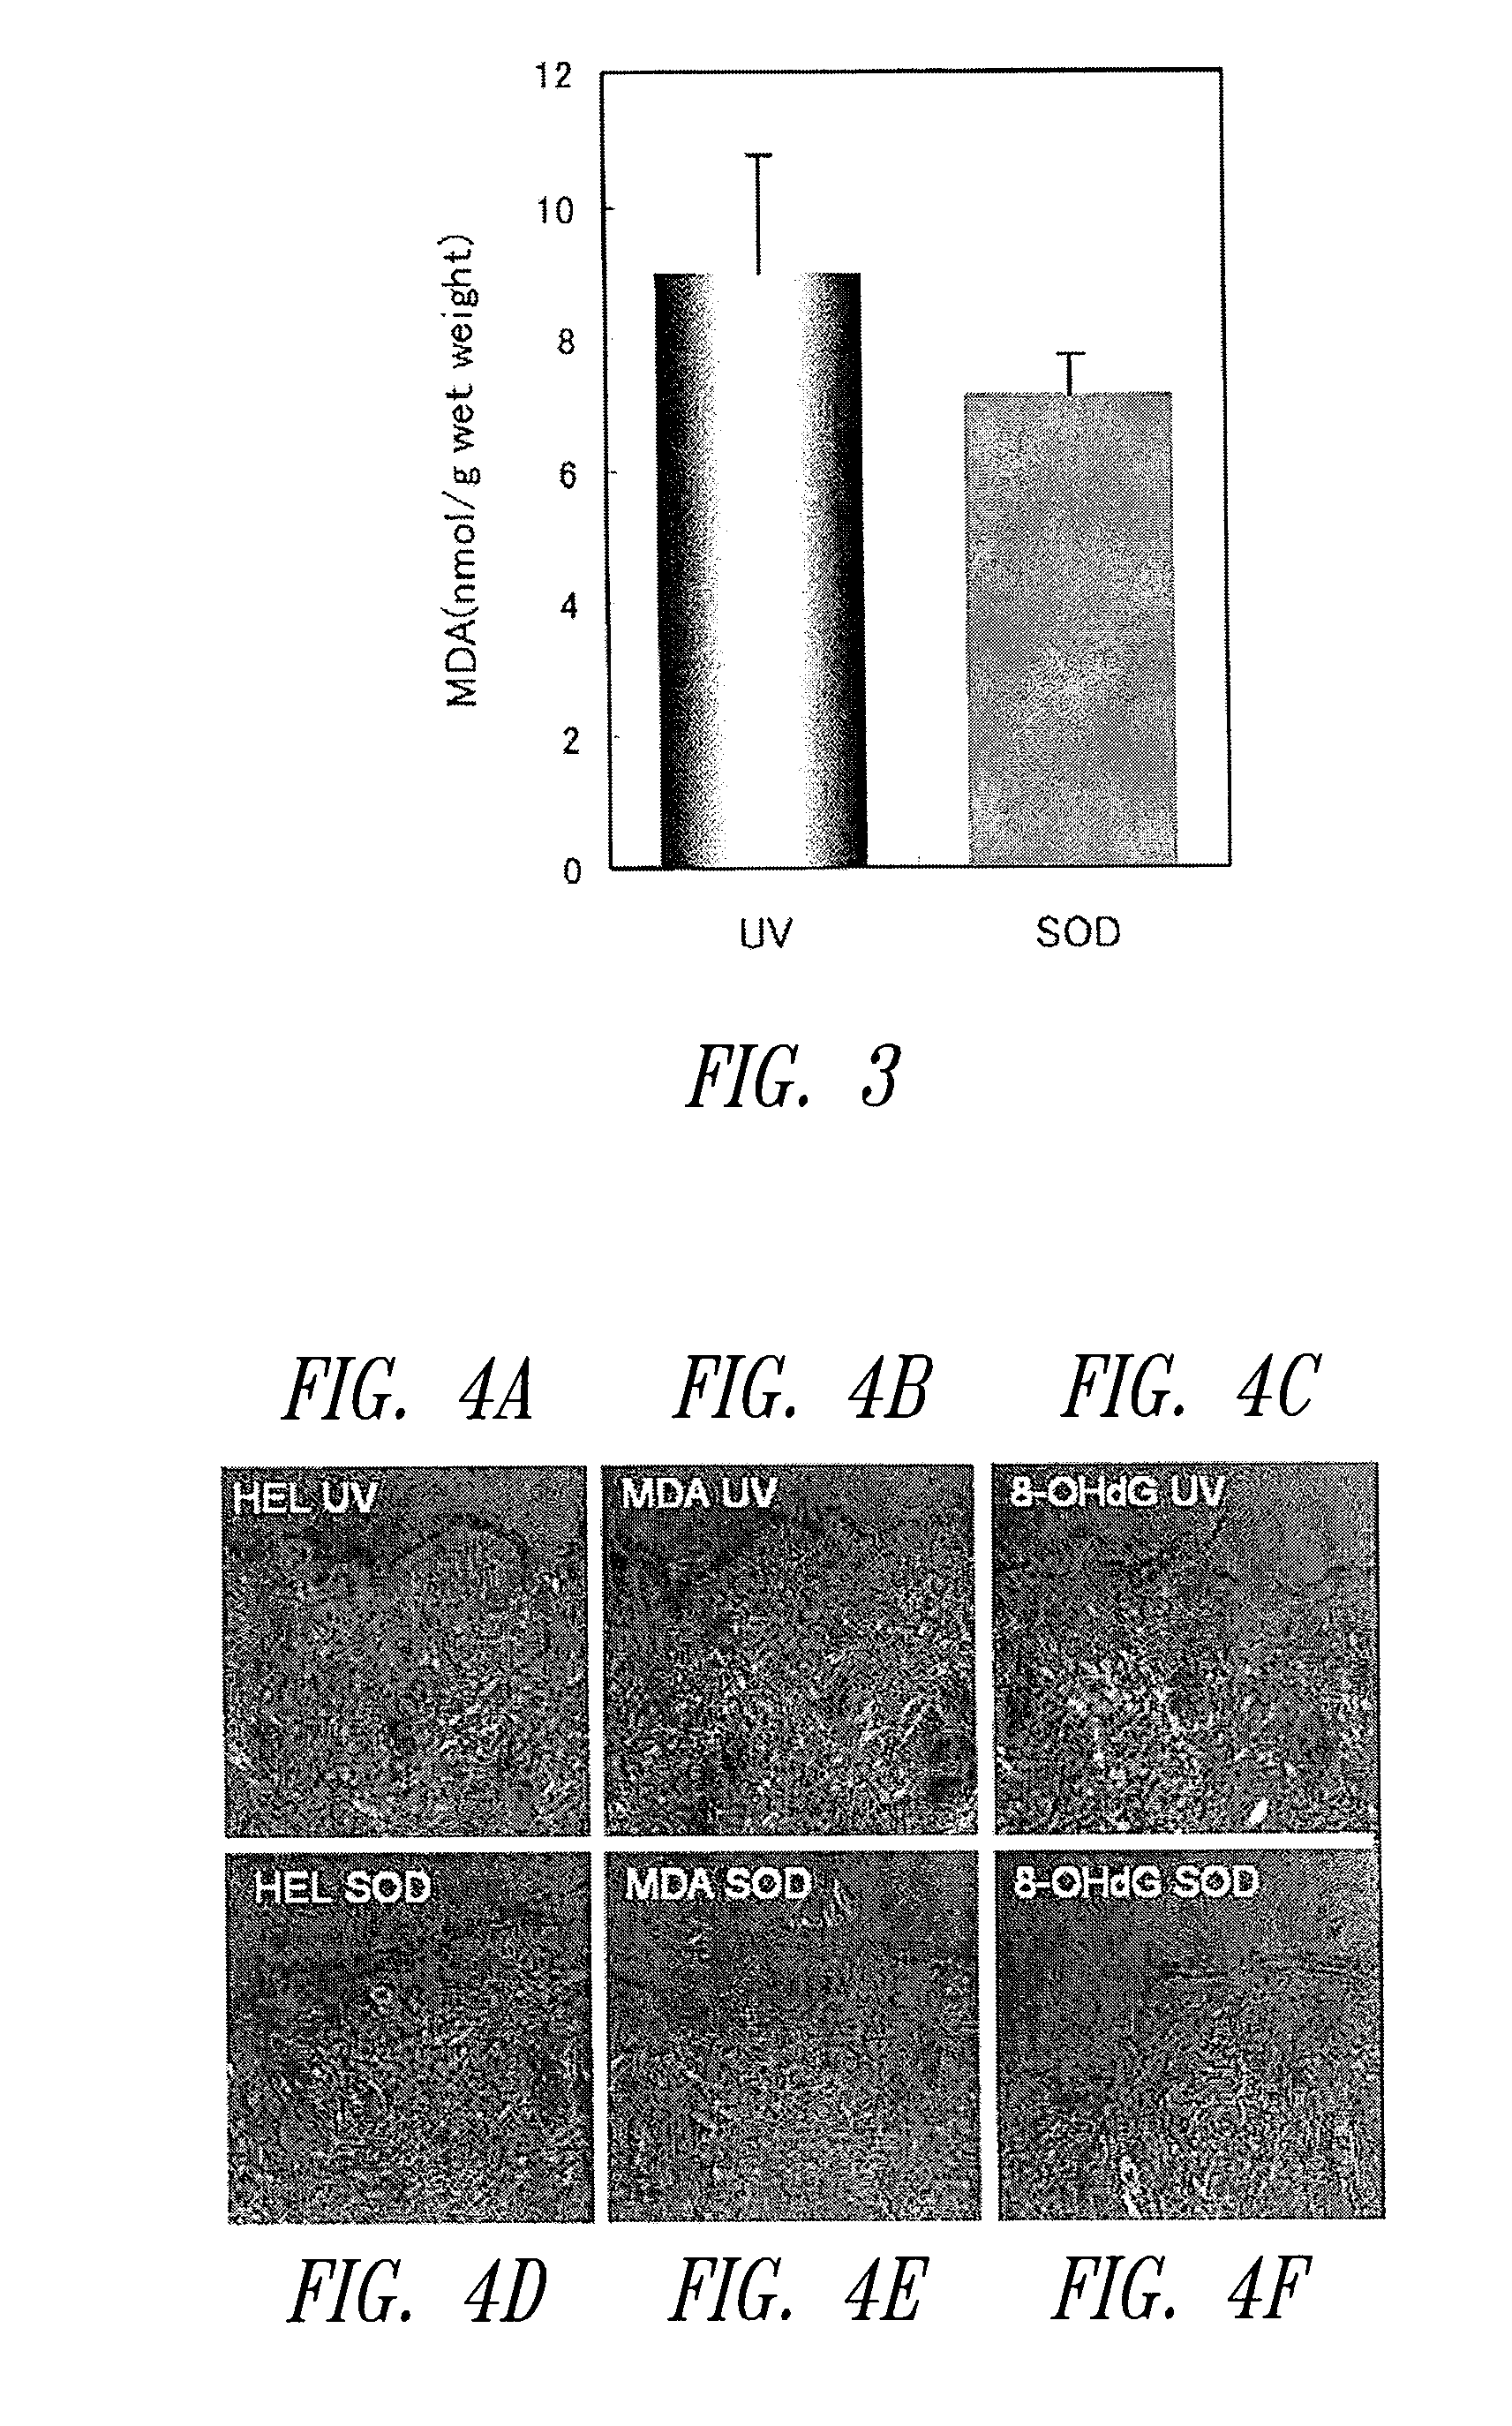 System, devices, and methods for iontophoretic delivery of compositions including antioxidants encapsulated in liposomes